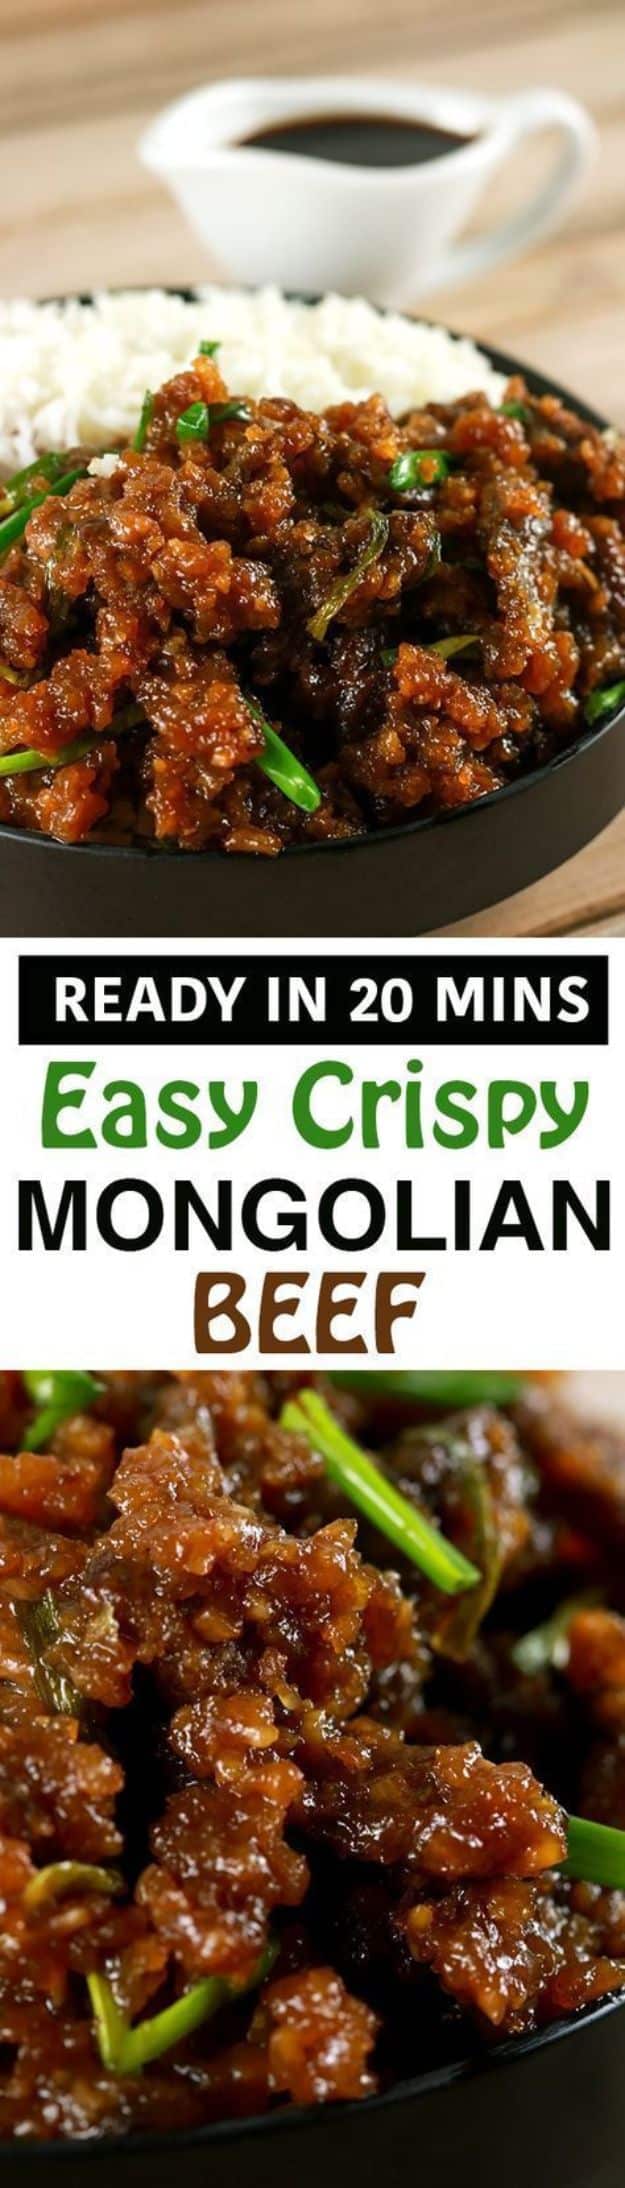  Easy Dinner Recipes - Easy Crispy Mongolian Beef - Quick and Simple Dinner Recipe Ideas for Weeknight and Last Minute Supper - Chicken, Ground Beef, Fish, Pasta, Healthy Salads, Low Fat and Vegetarian Dishes #easyrecipes #dinnerideas #recipes